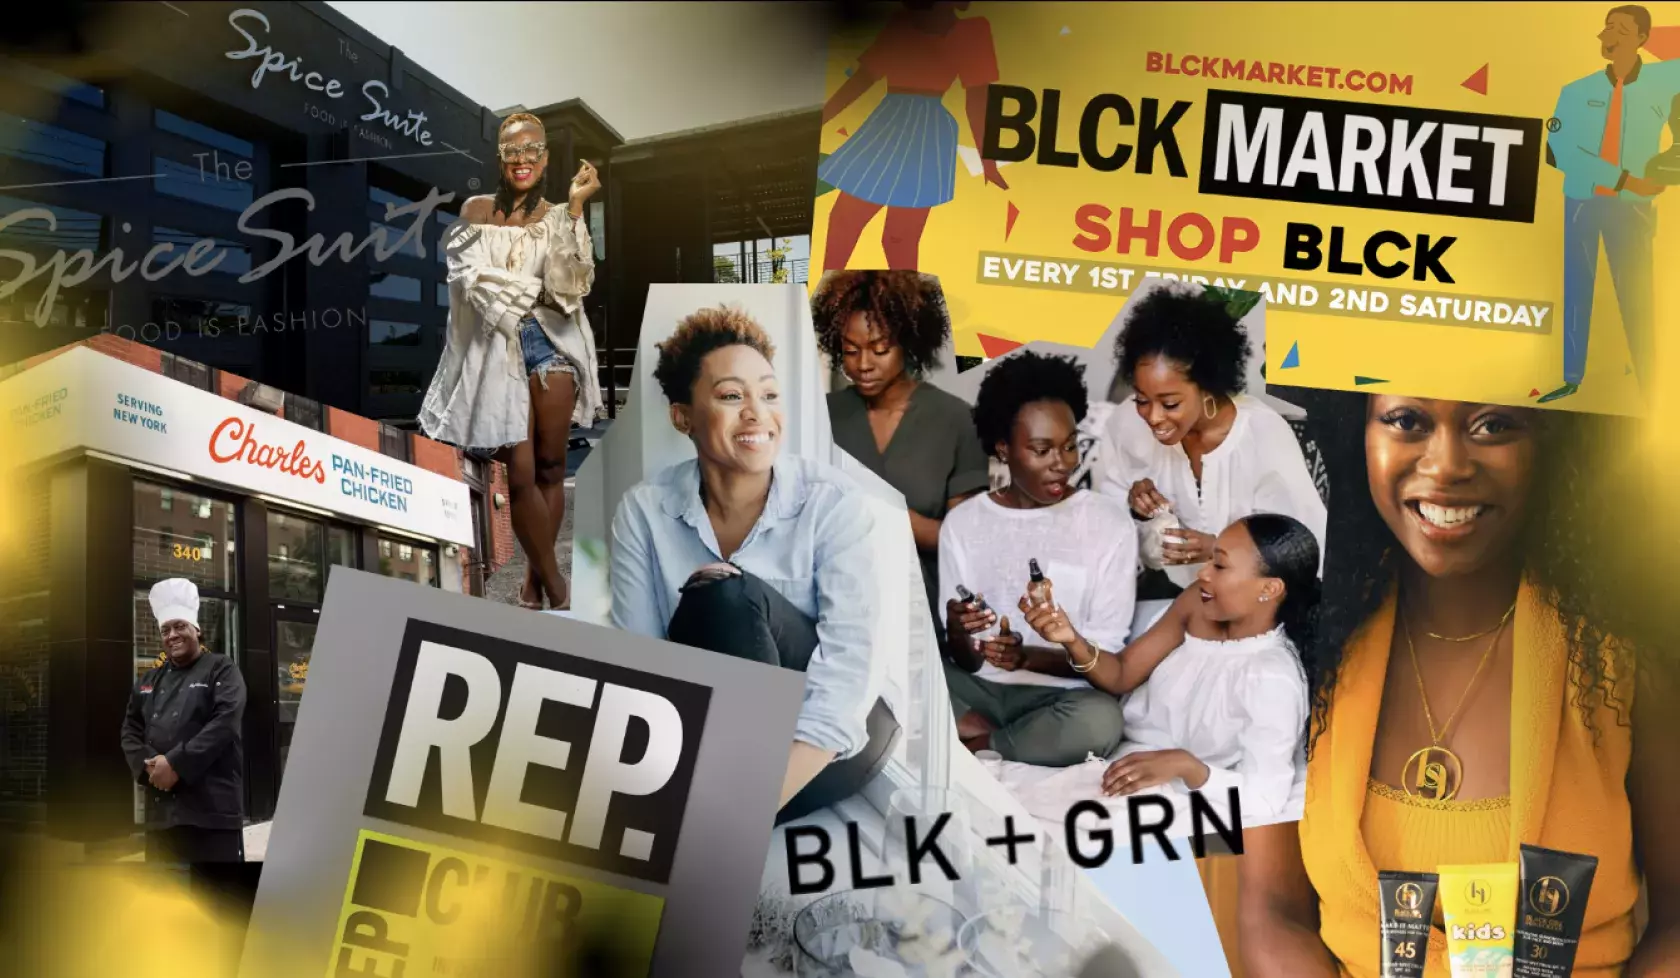 A collage of Black businesses